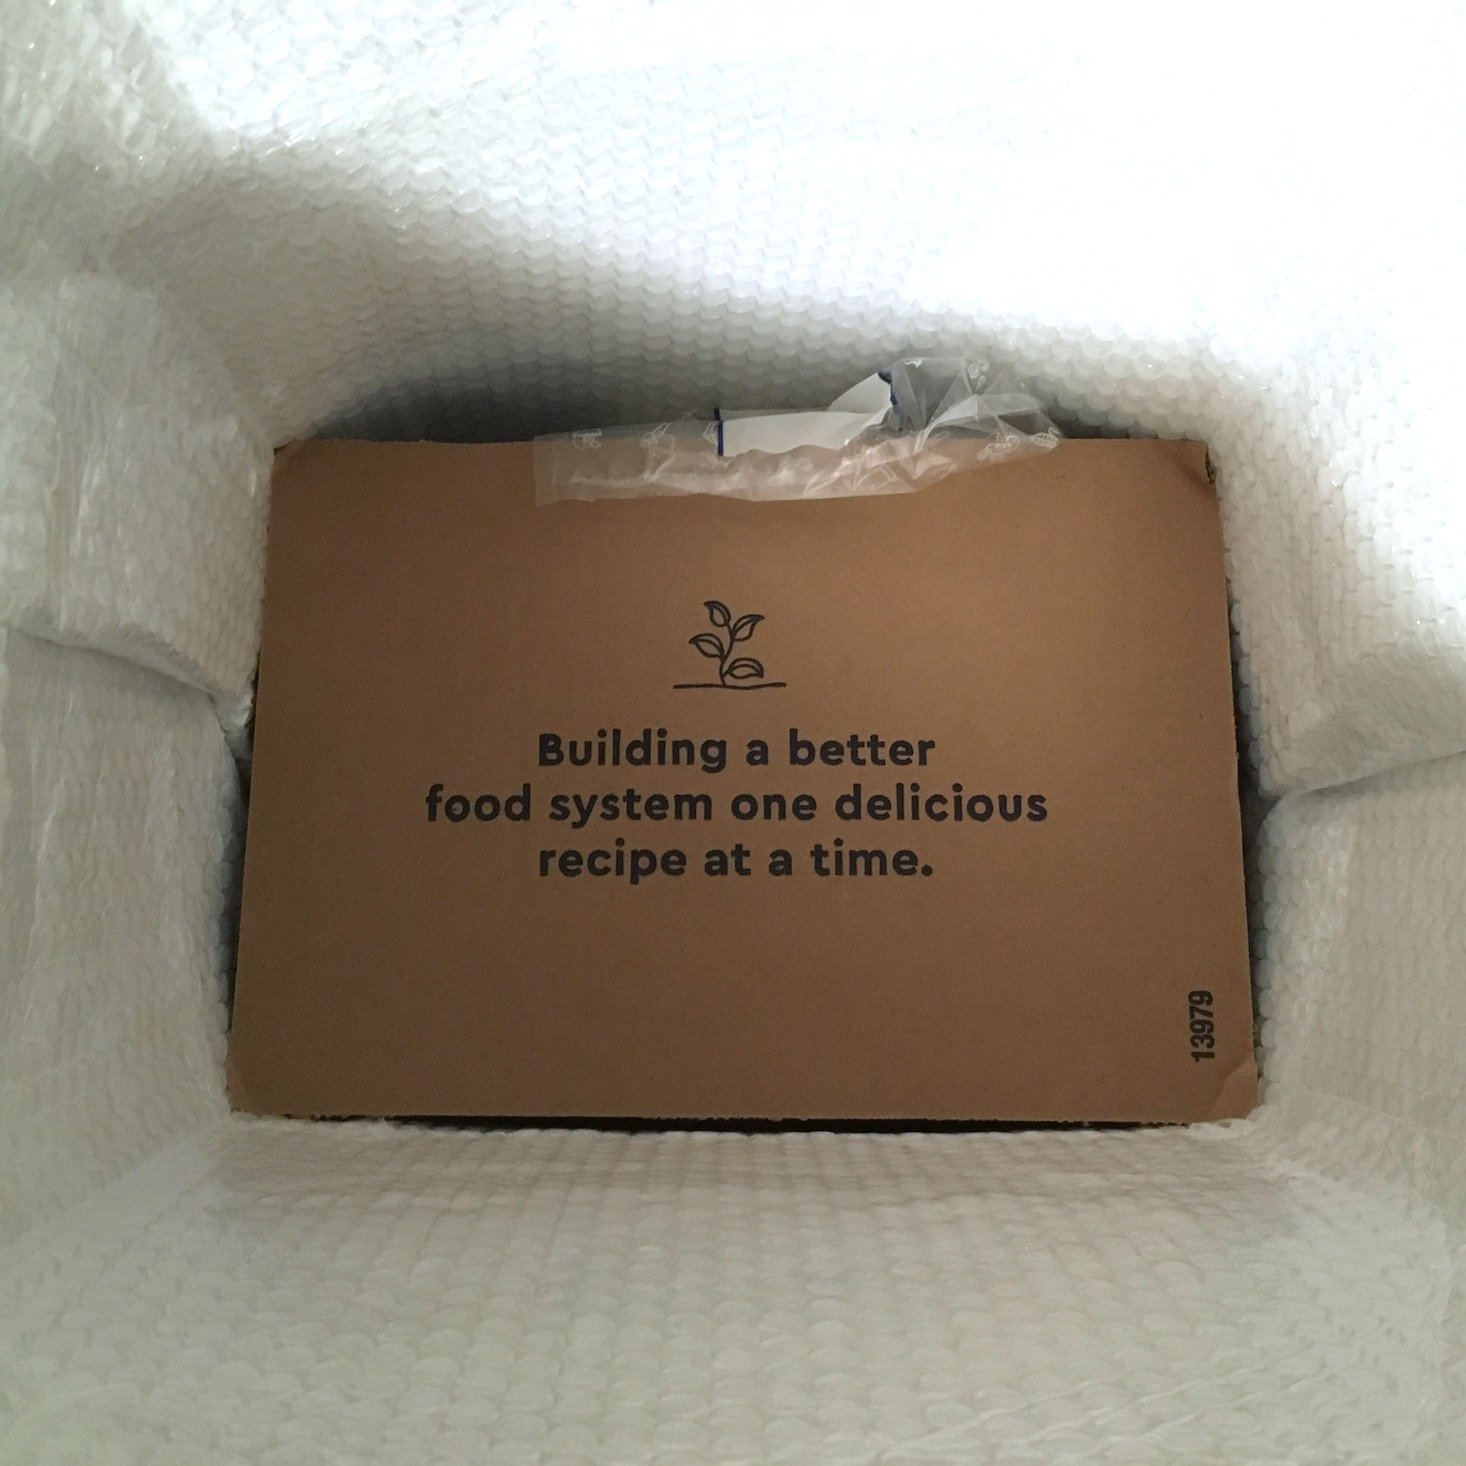 cardboard divider within the box